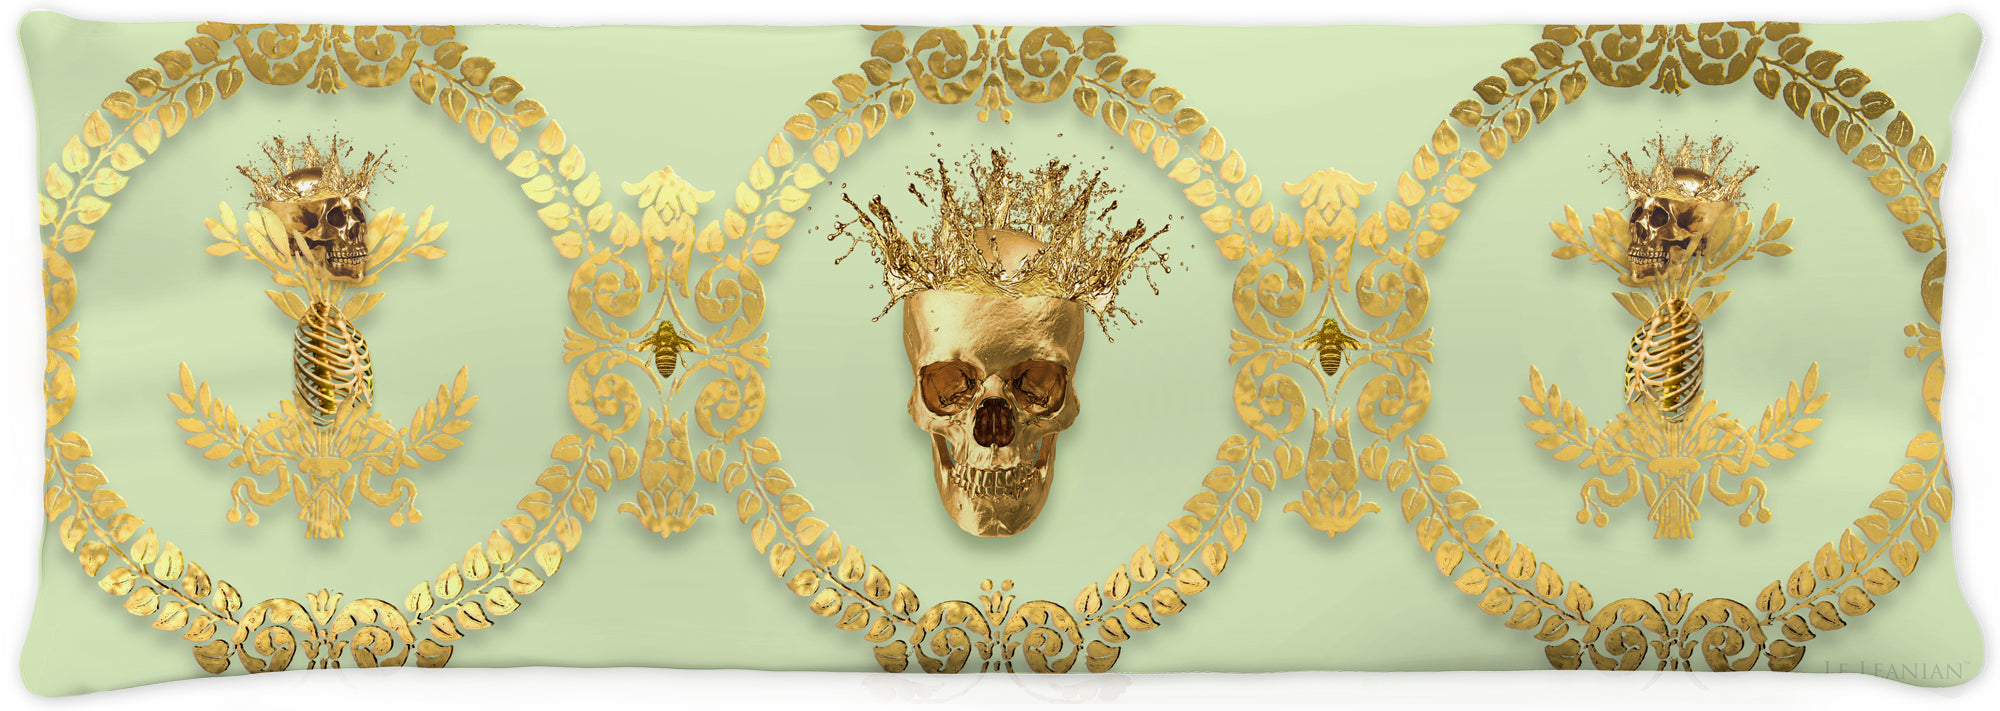 CROWN GOLD SKULL-GOLD RIBS-Body Pillow-PILLOW CASE- color PASTEL GREEN